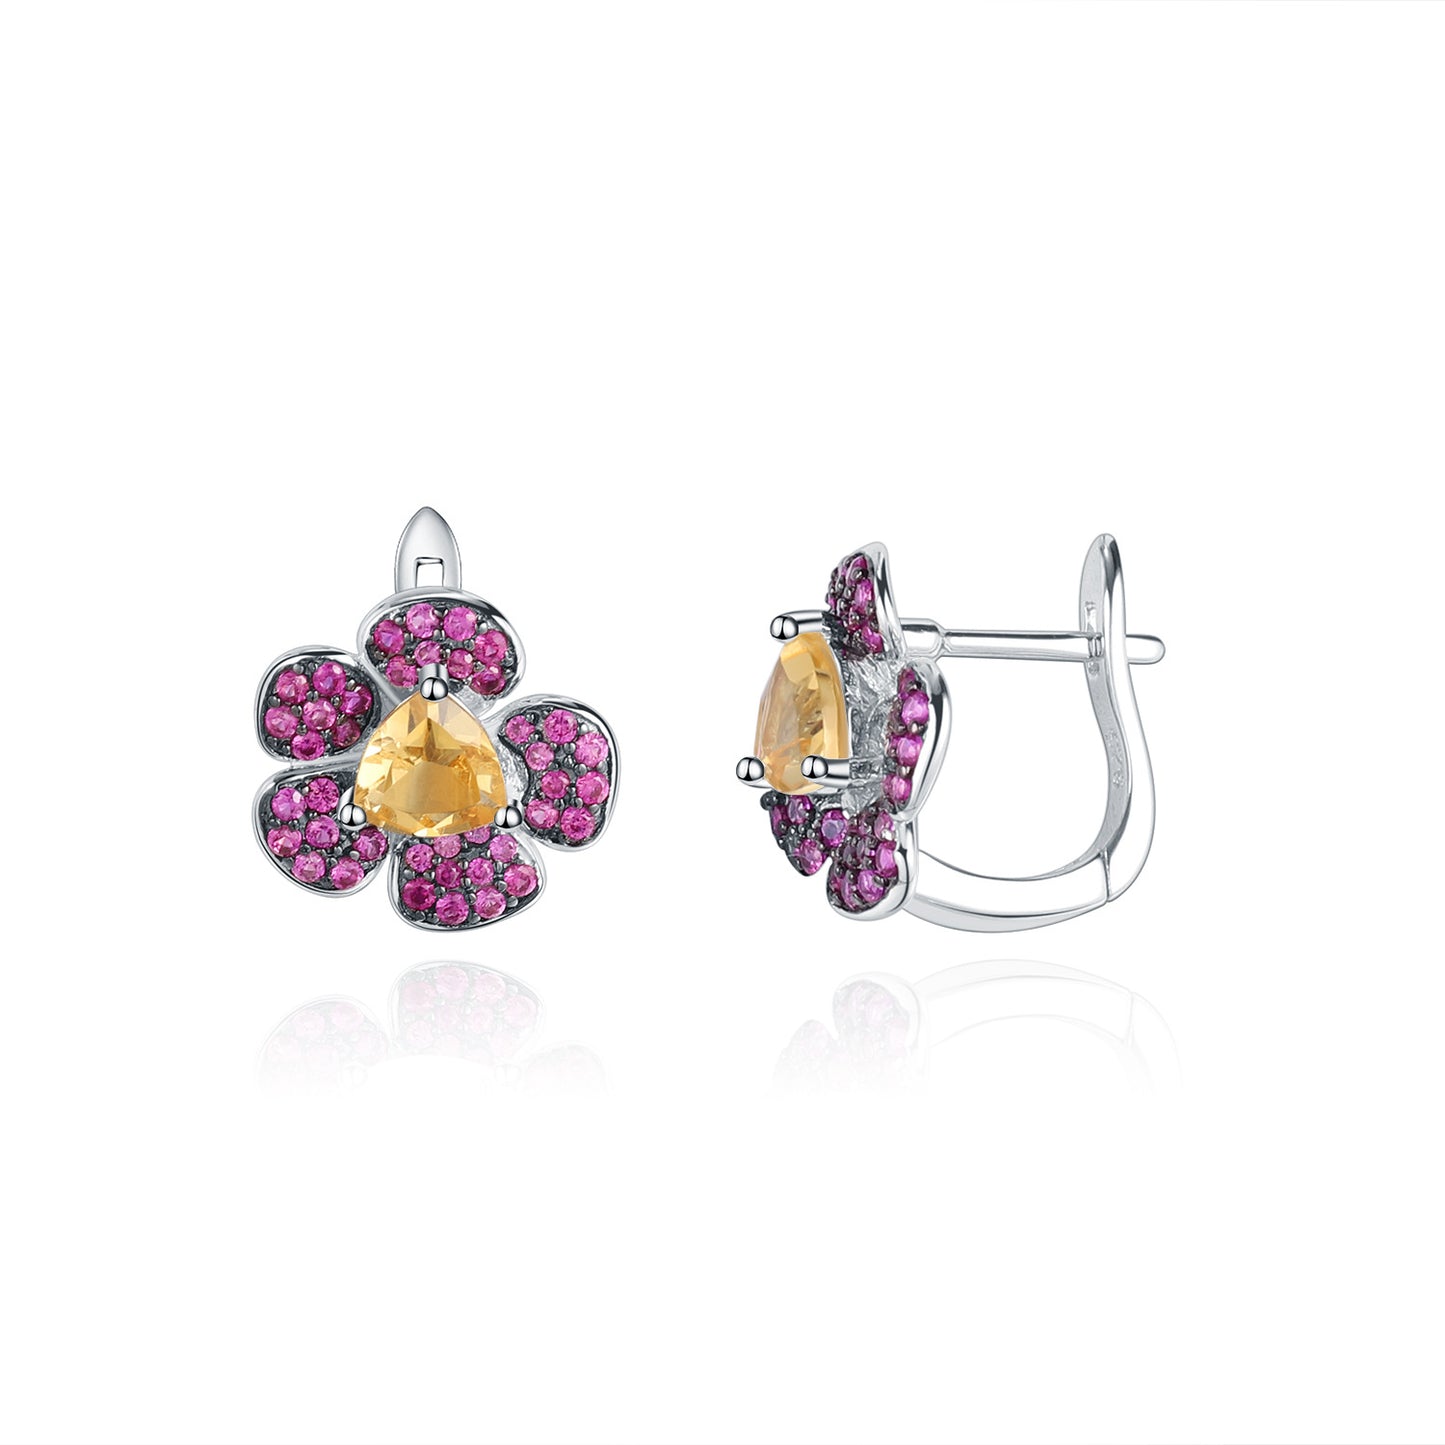 Simple Natural Style Inlaid Colourful Gemstoes Flower Silver Studs Earrings for Women